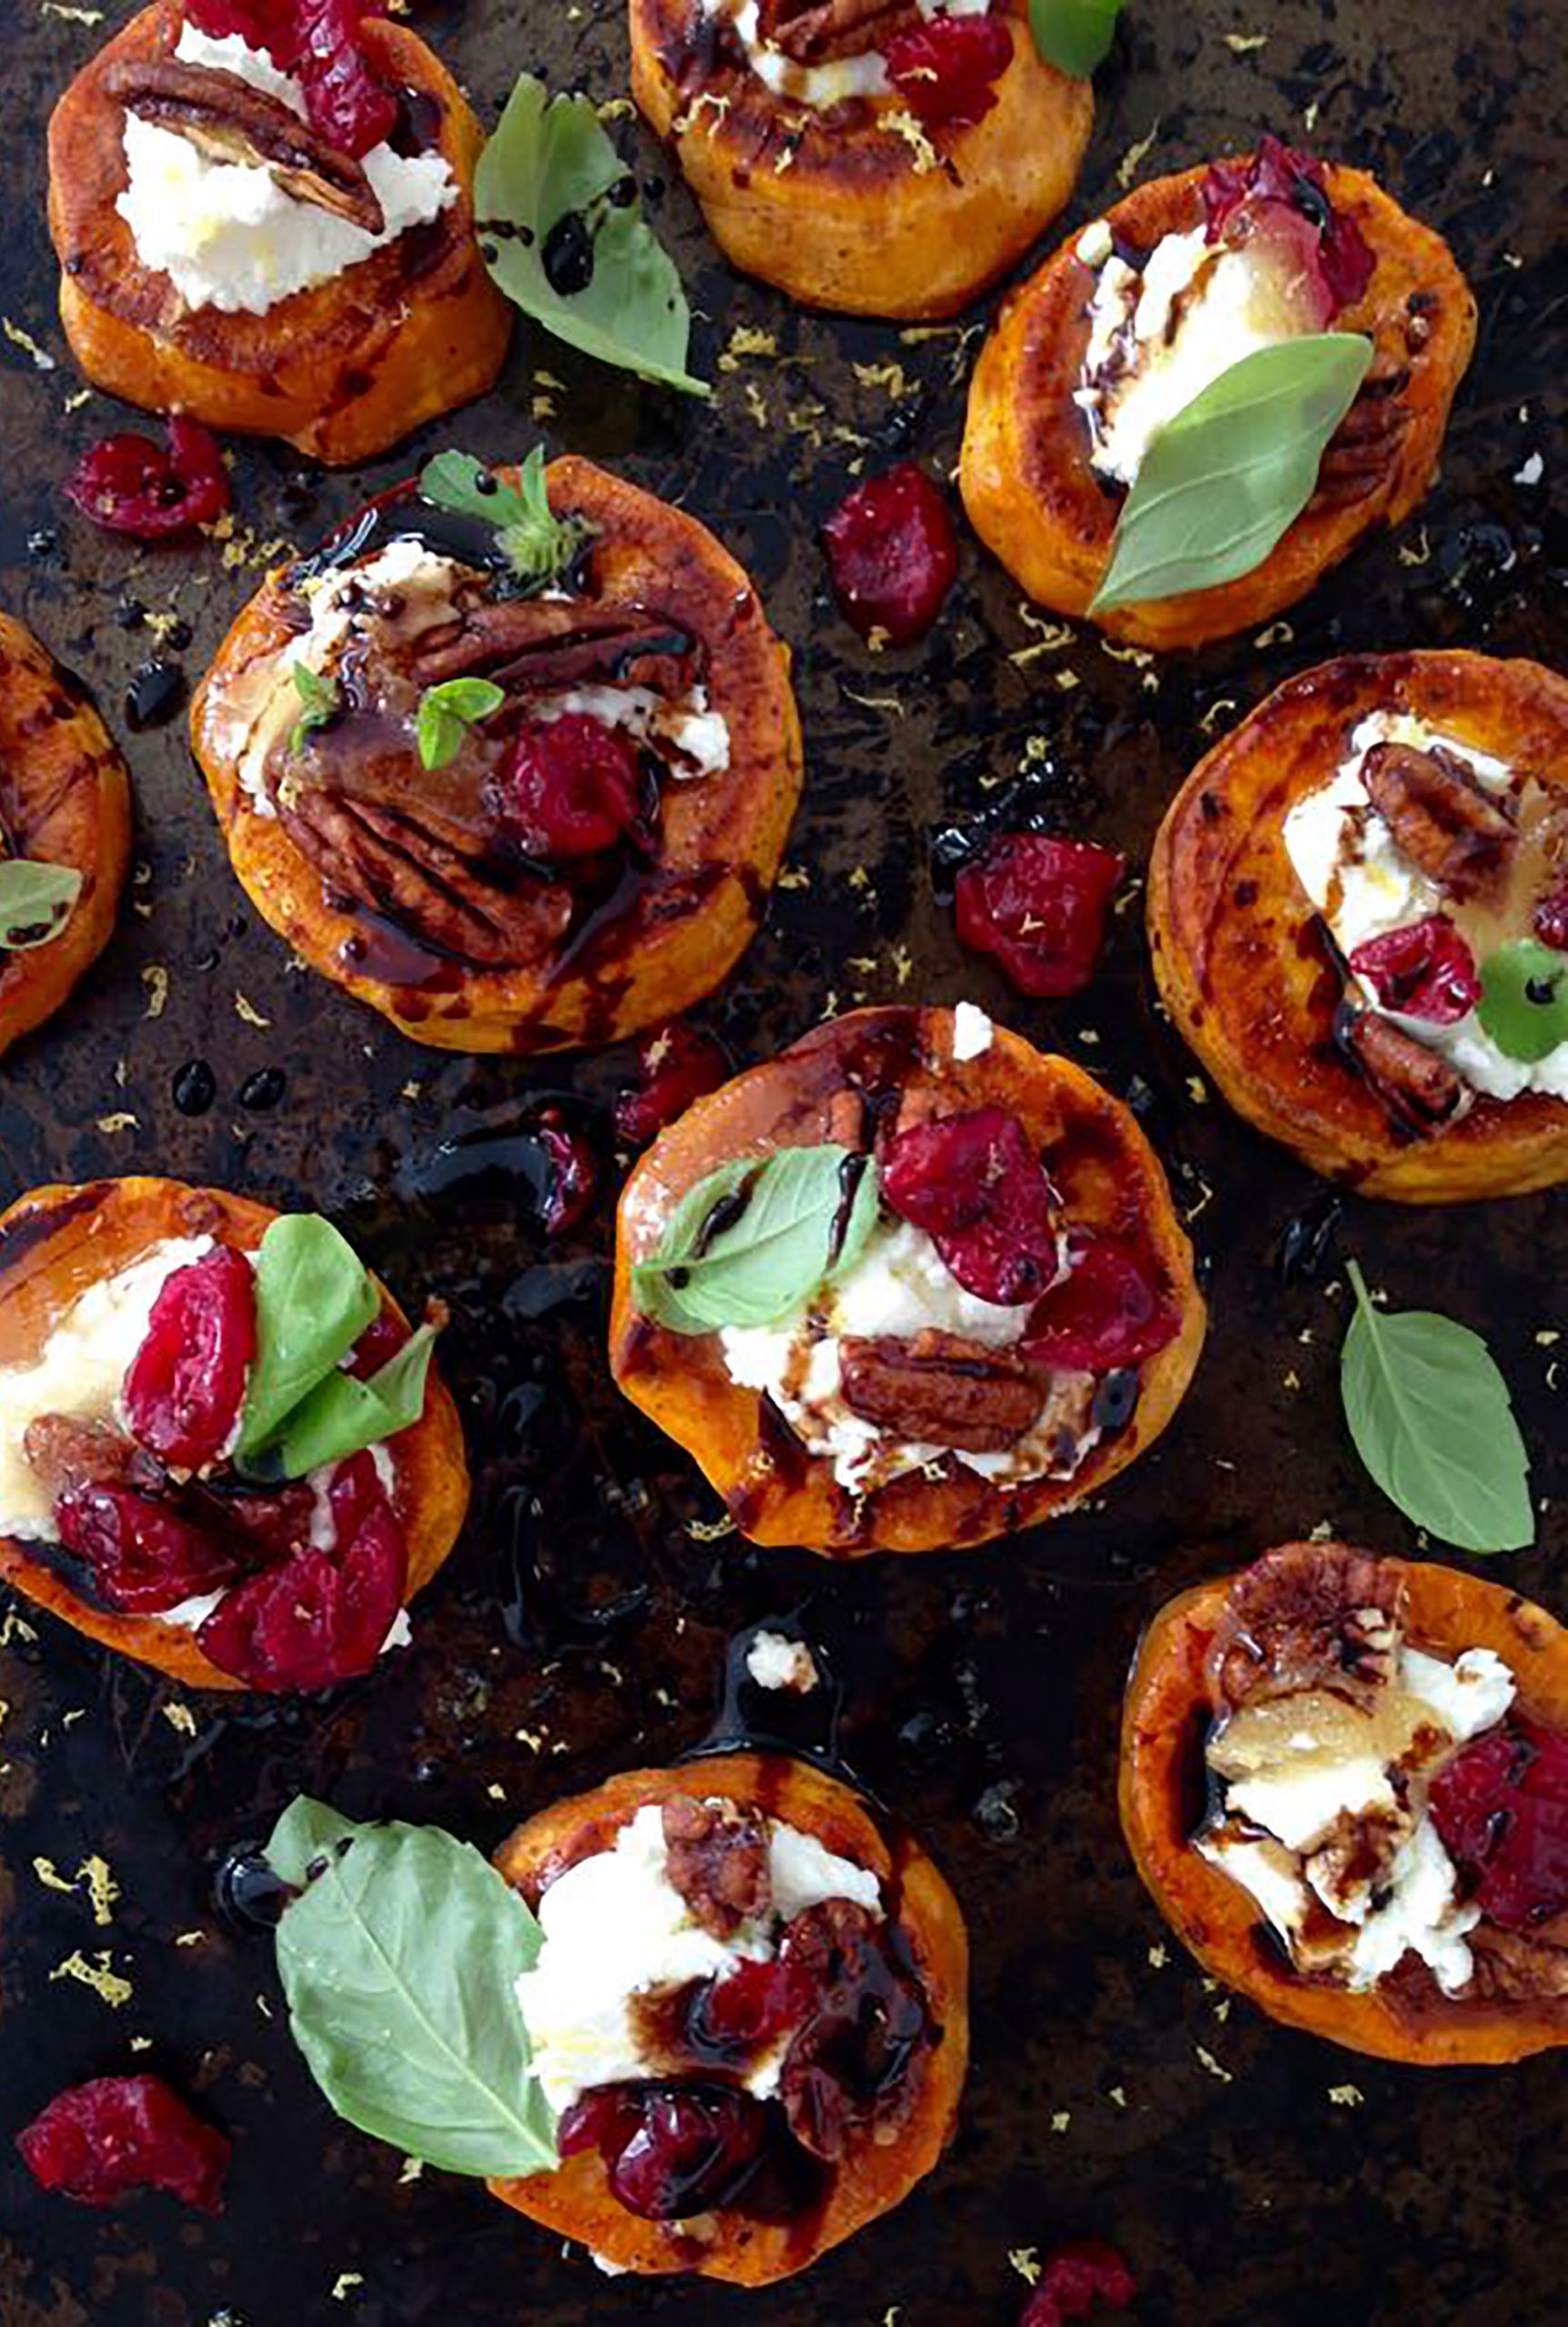 Healthy Fall Appetizers
 13 Easy Fall Appetizers Best Recipes & Ideas for Autumn